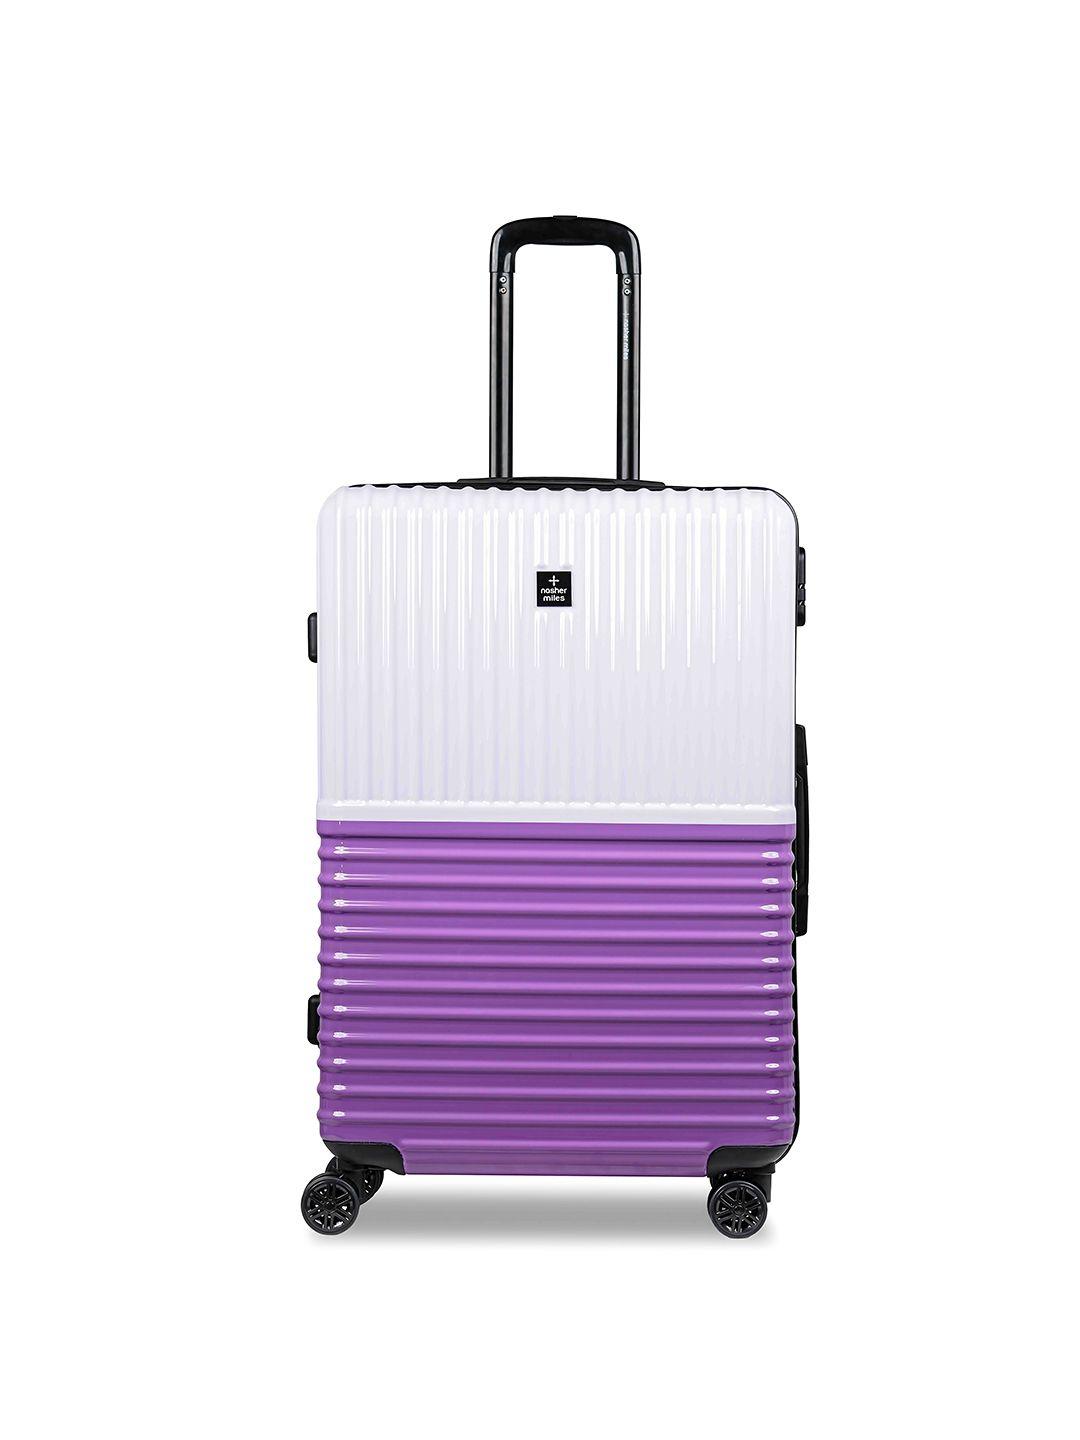 nasher miles textured hard-sided large trolley suitcase